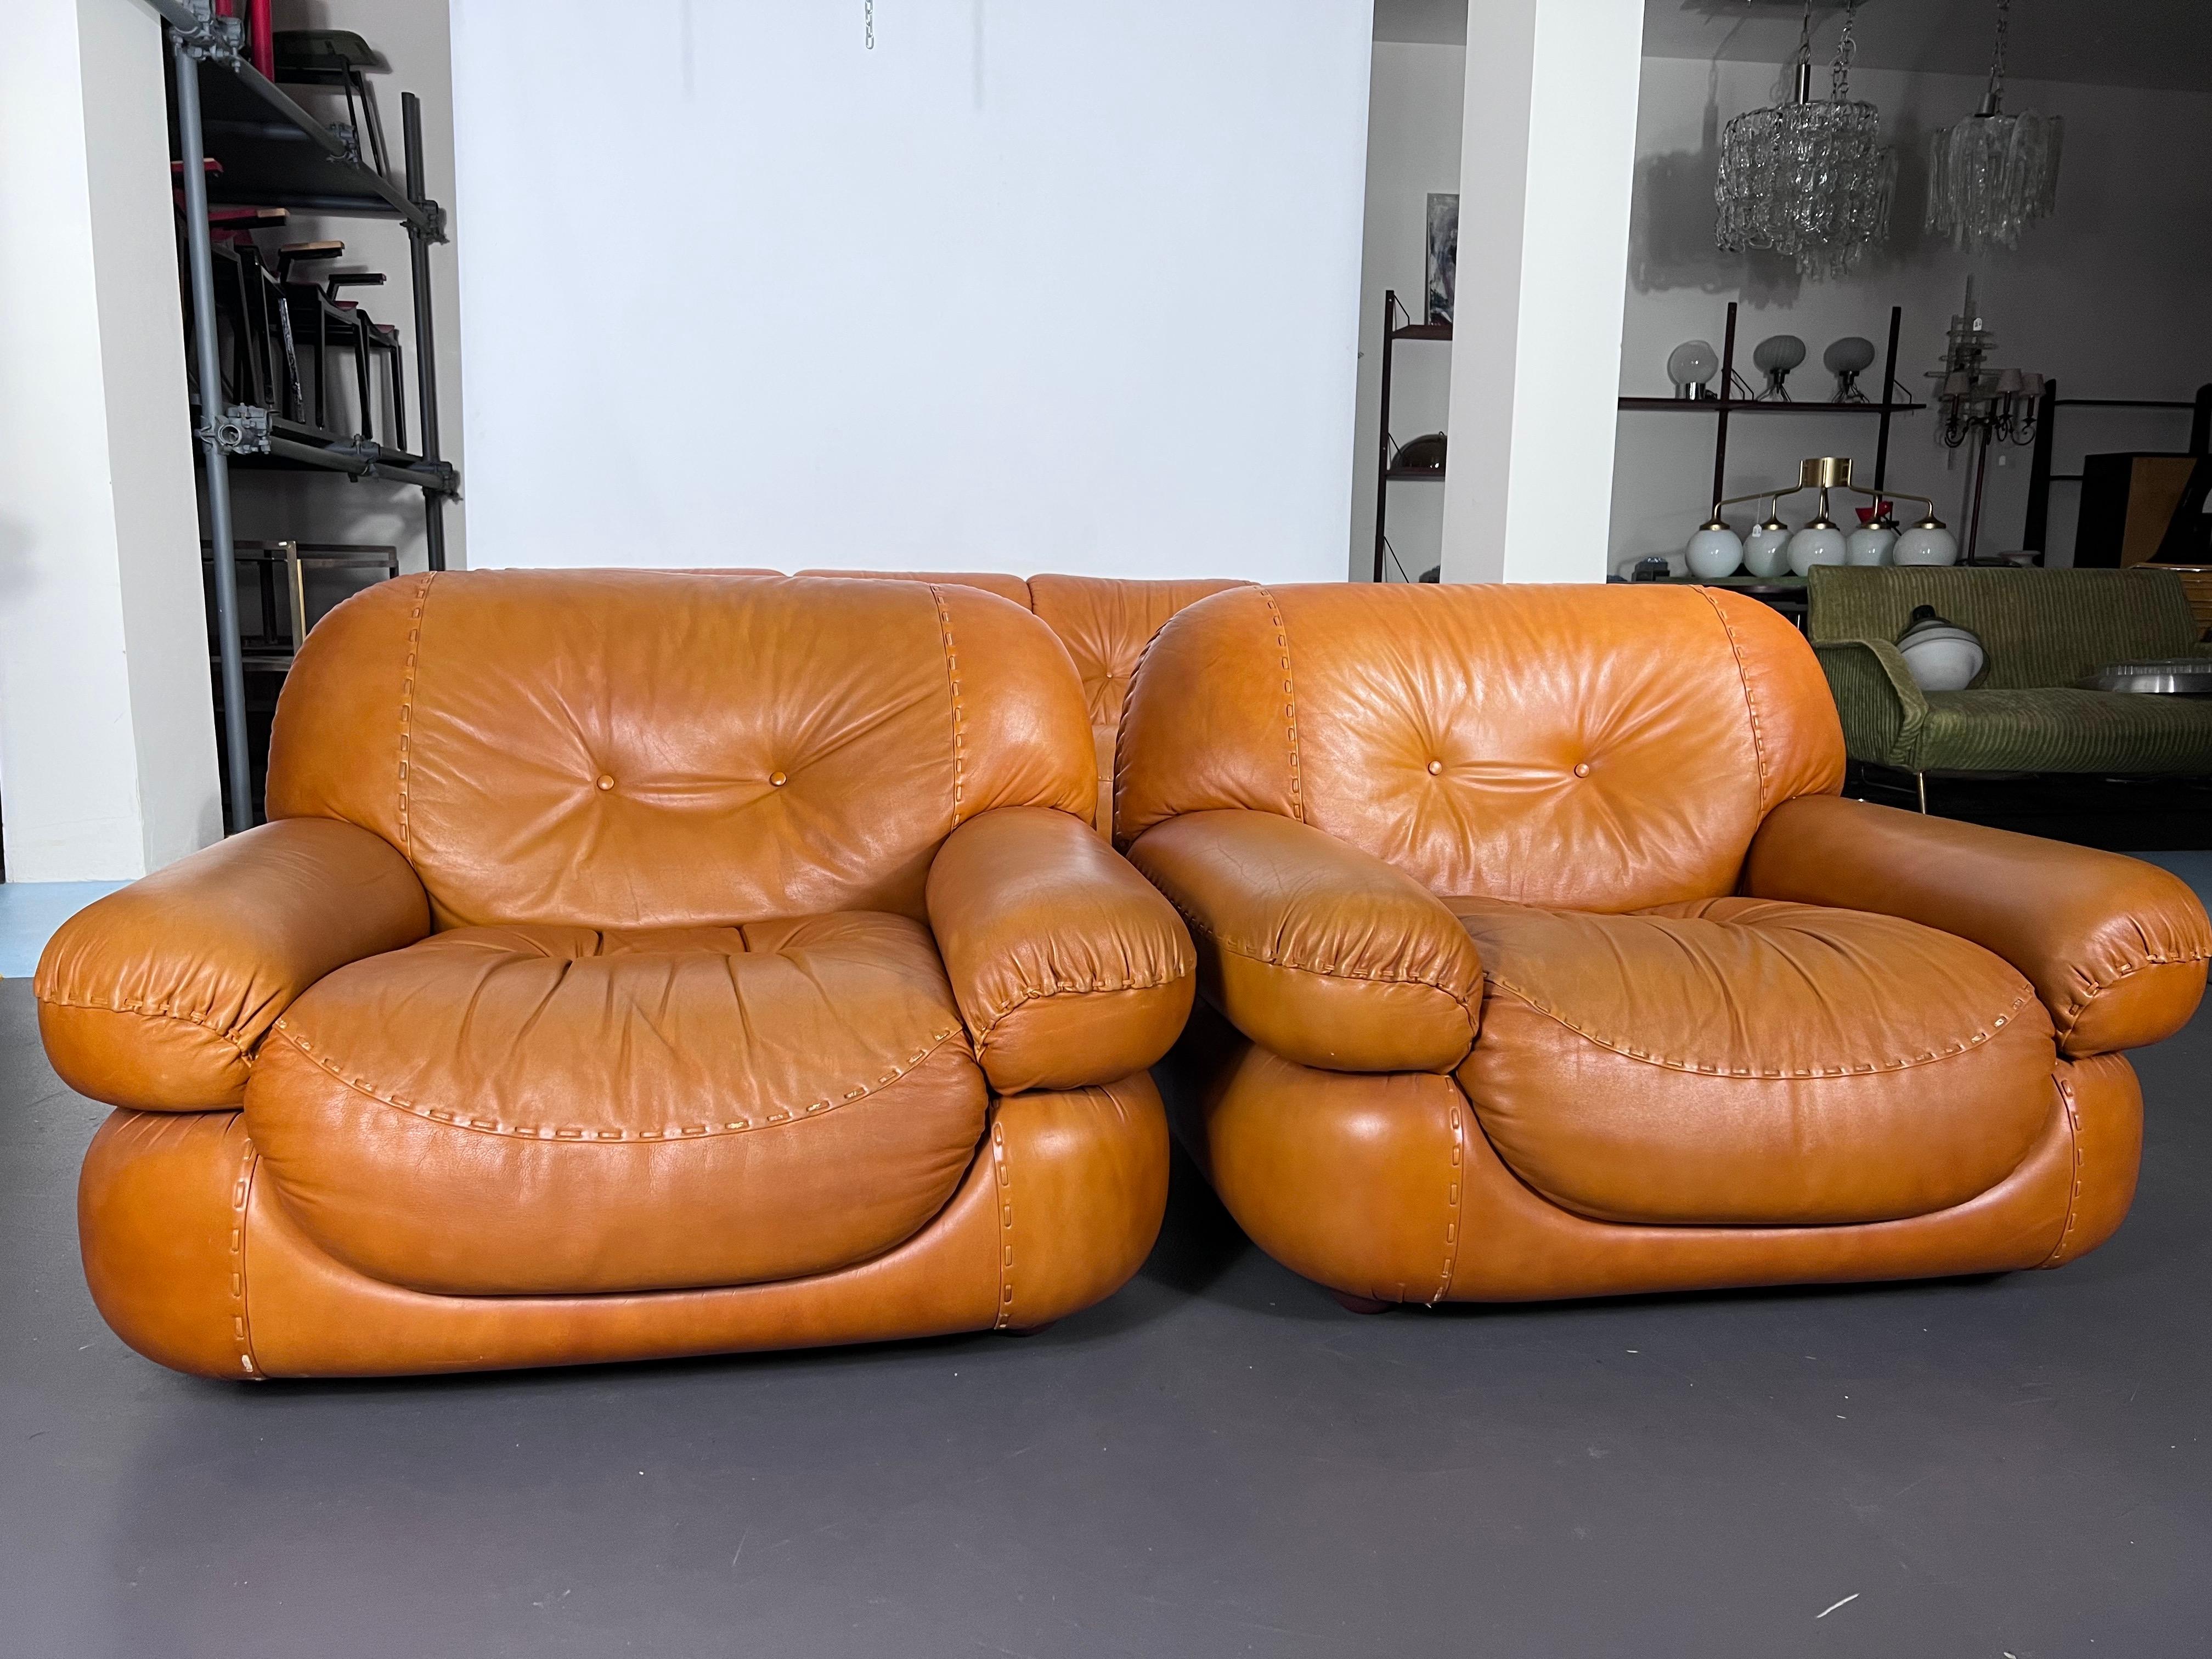 Vintage Sofa Set in Cognac Leather by Sapporo for Mobil Girgi, Italy, 1970s For Sale 7